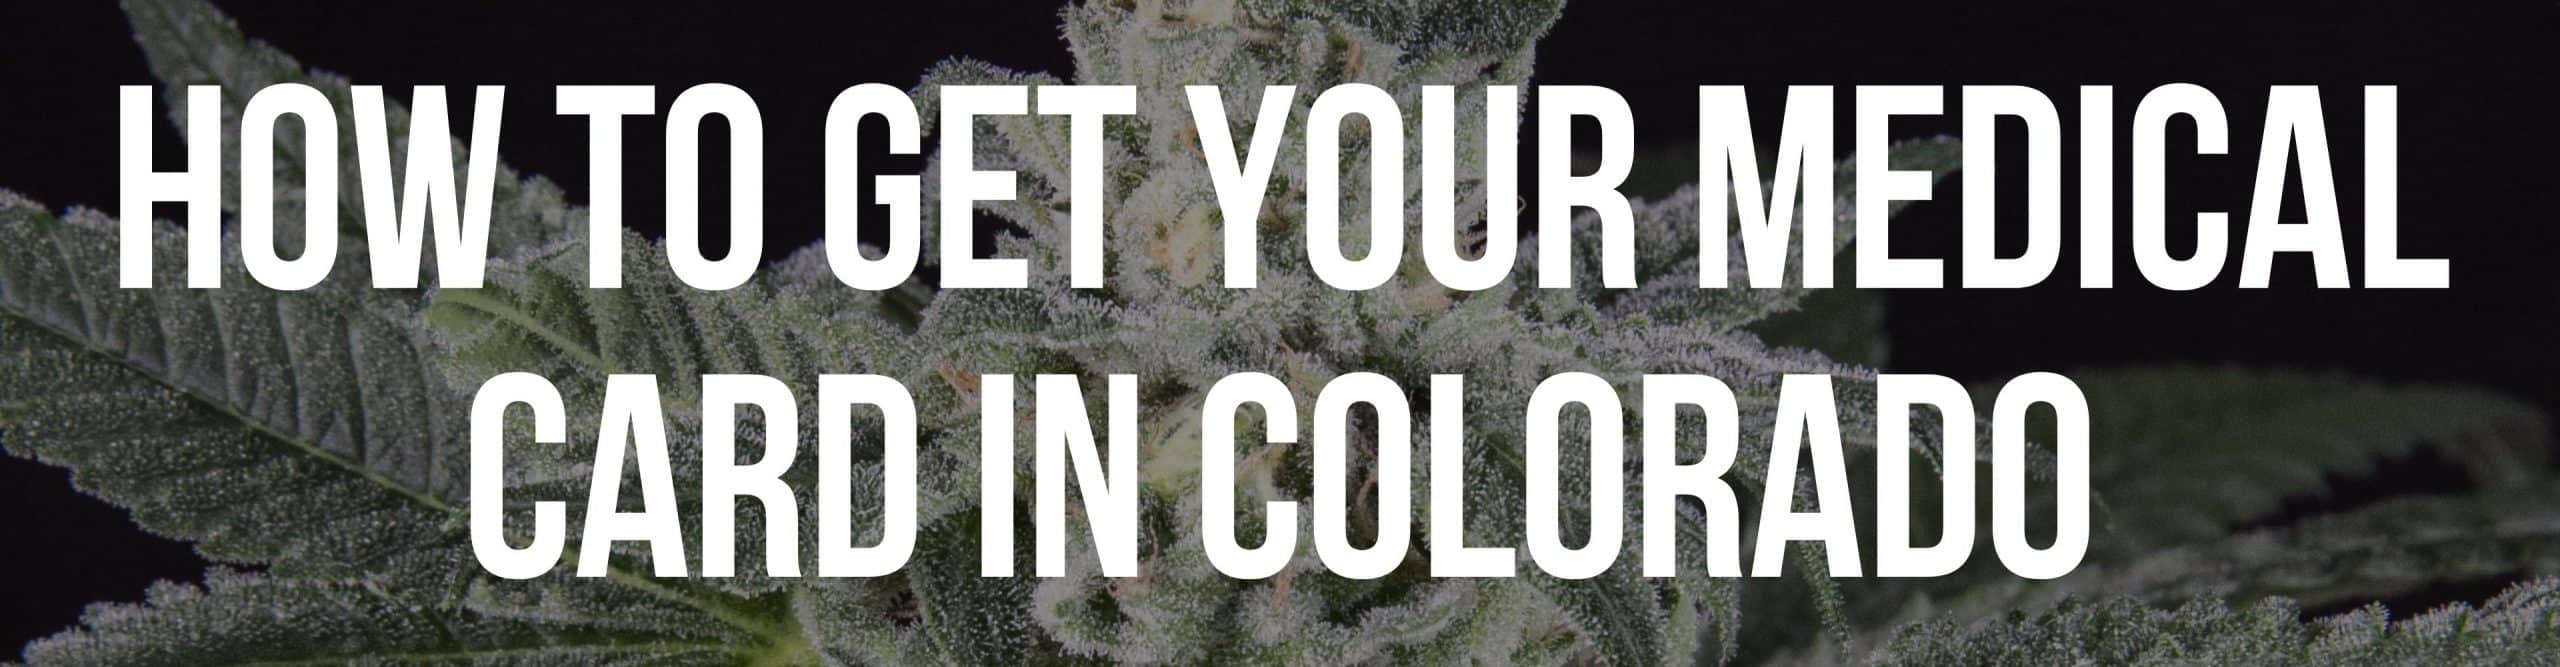 How To Get Your Medical Cannabis Card In Colorado